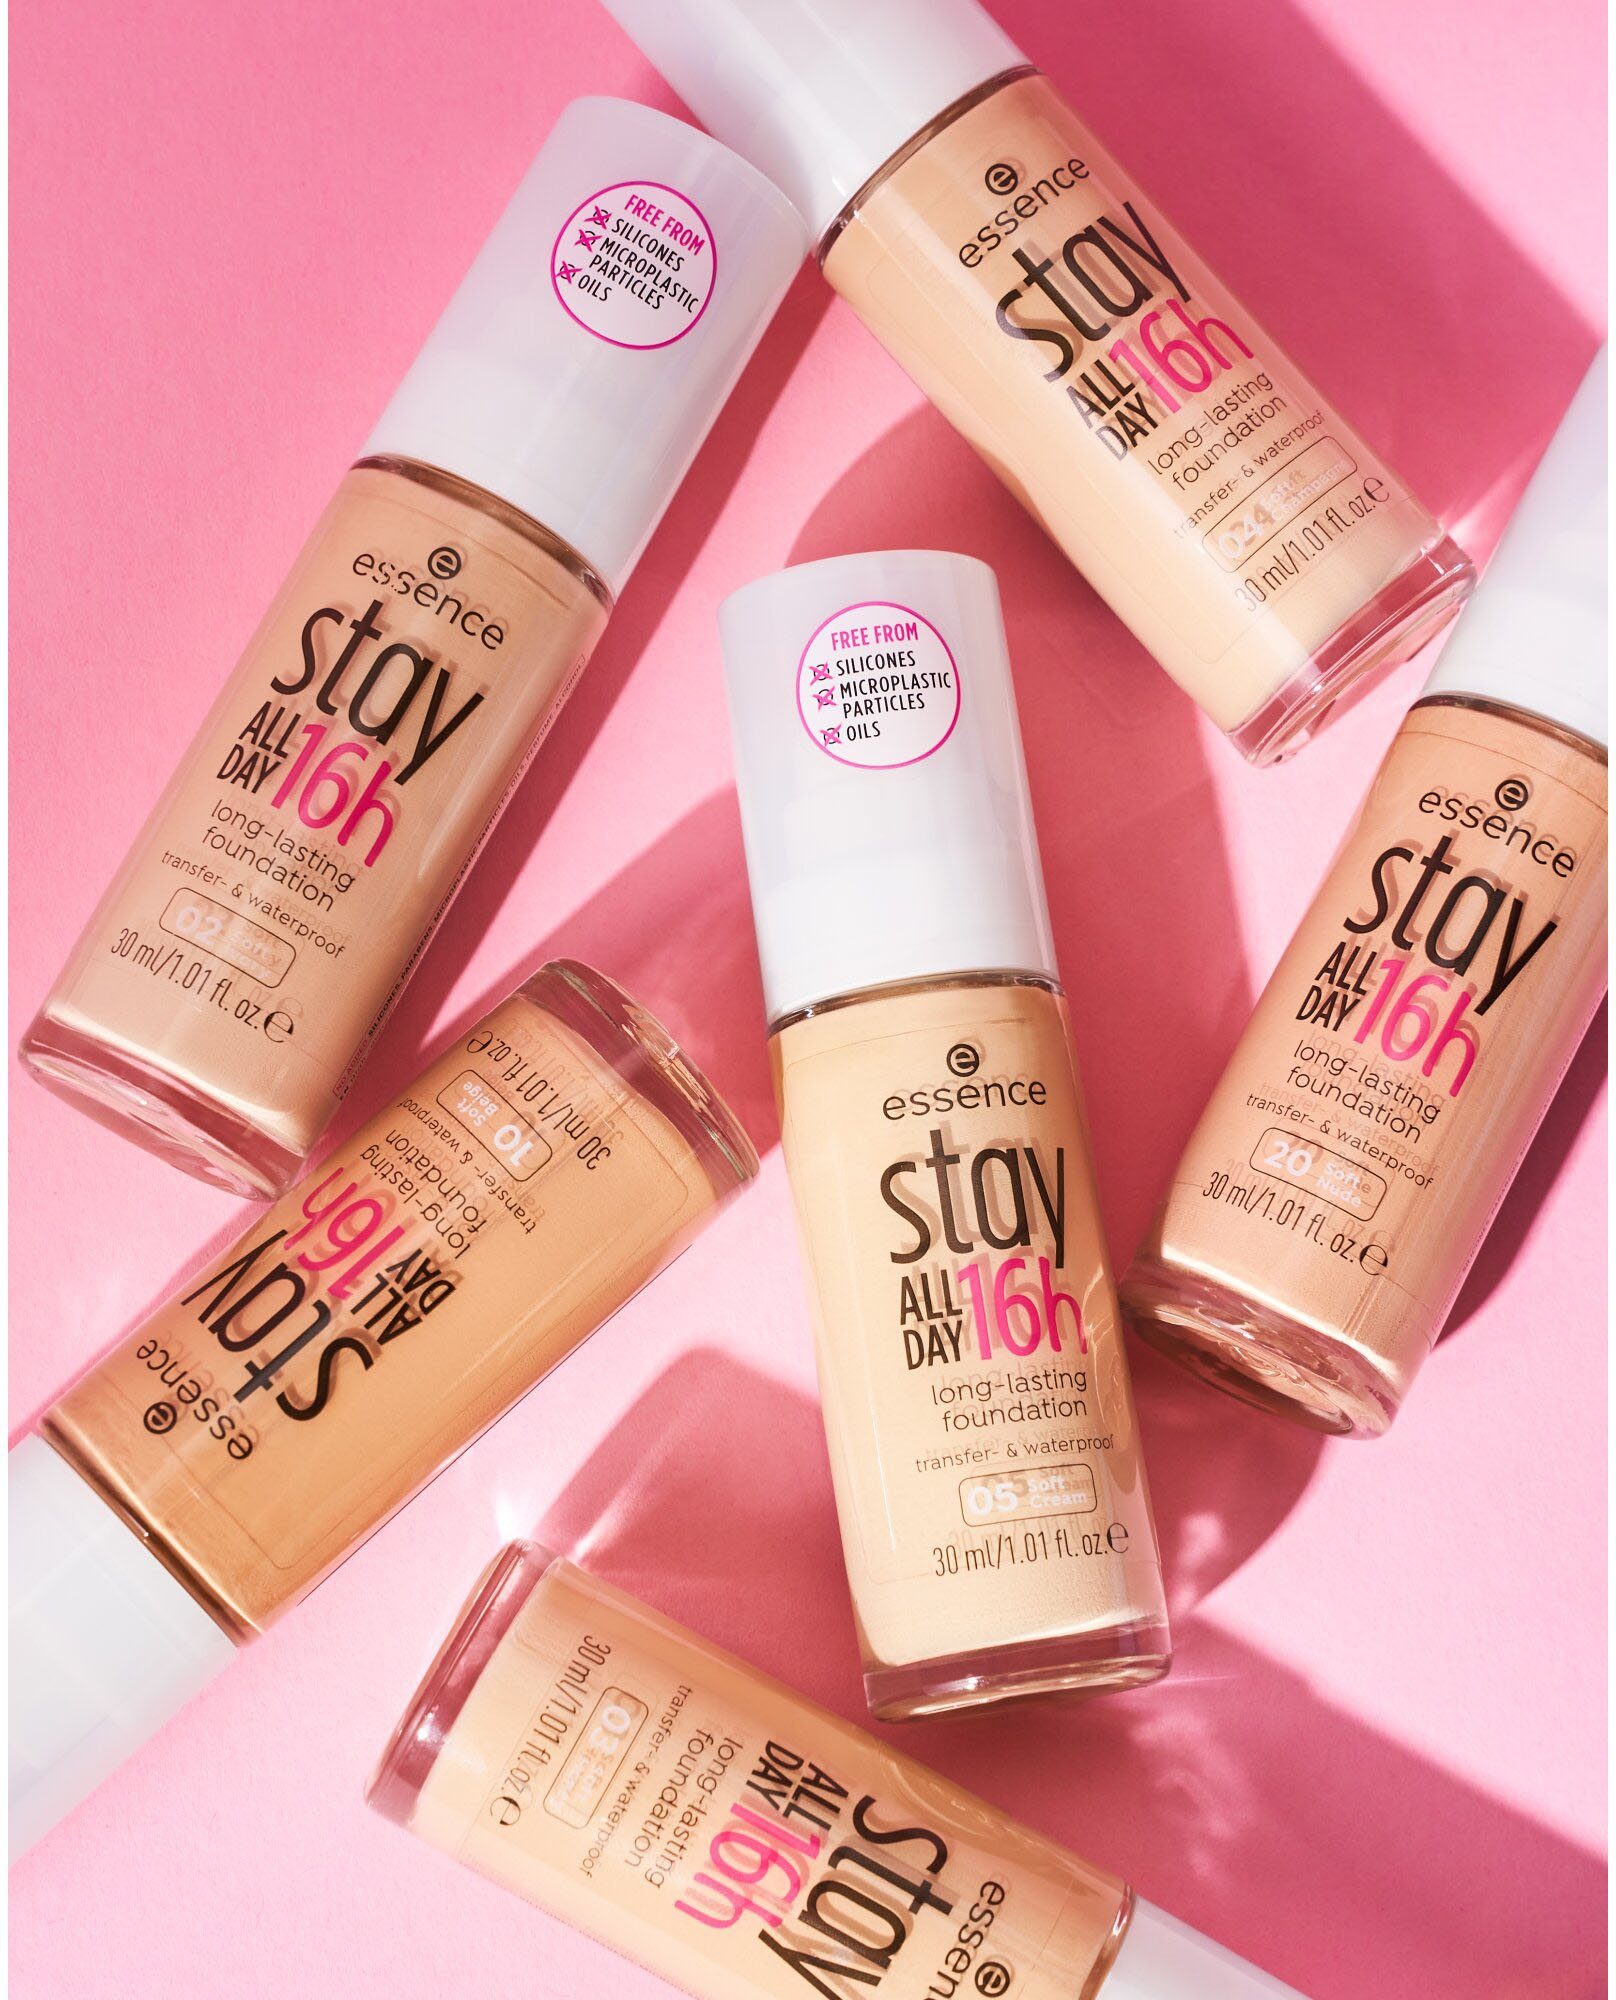 Essence Foundation stay ALL DAY long-lasting, Soft 16h 3-tlg. Sand